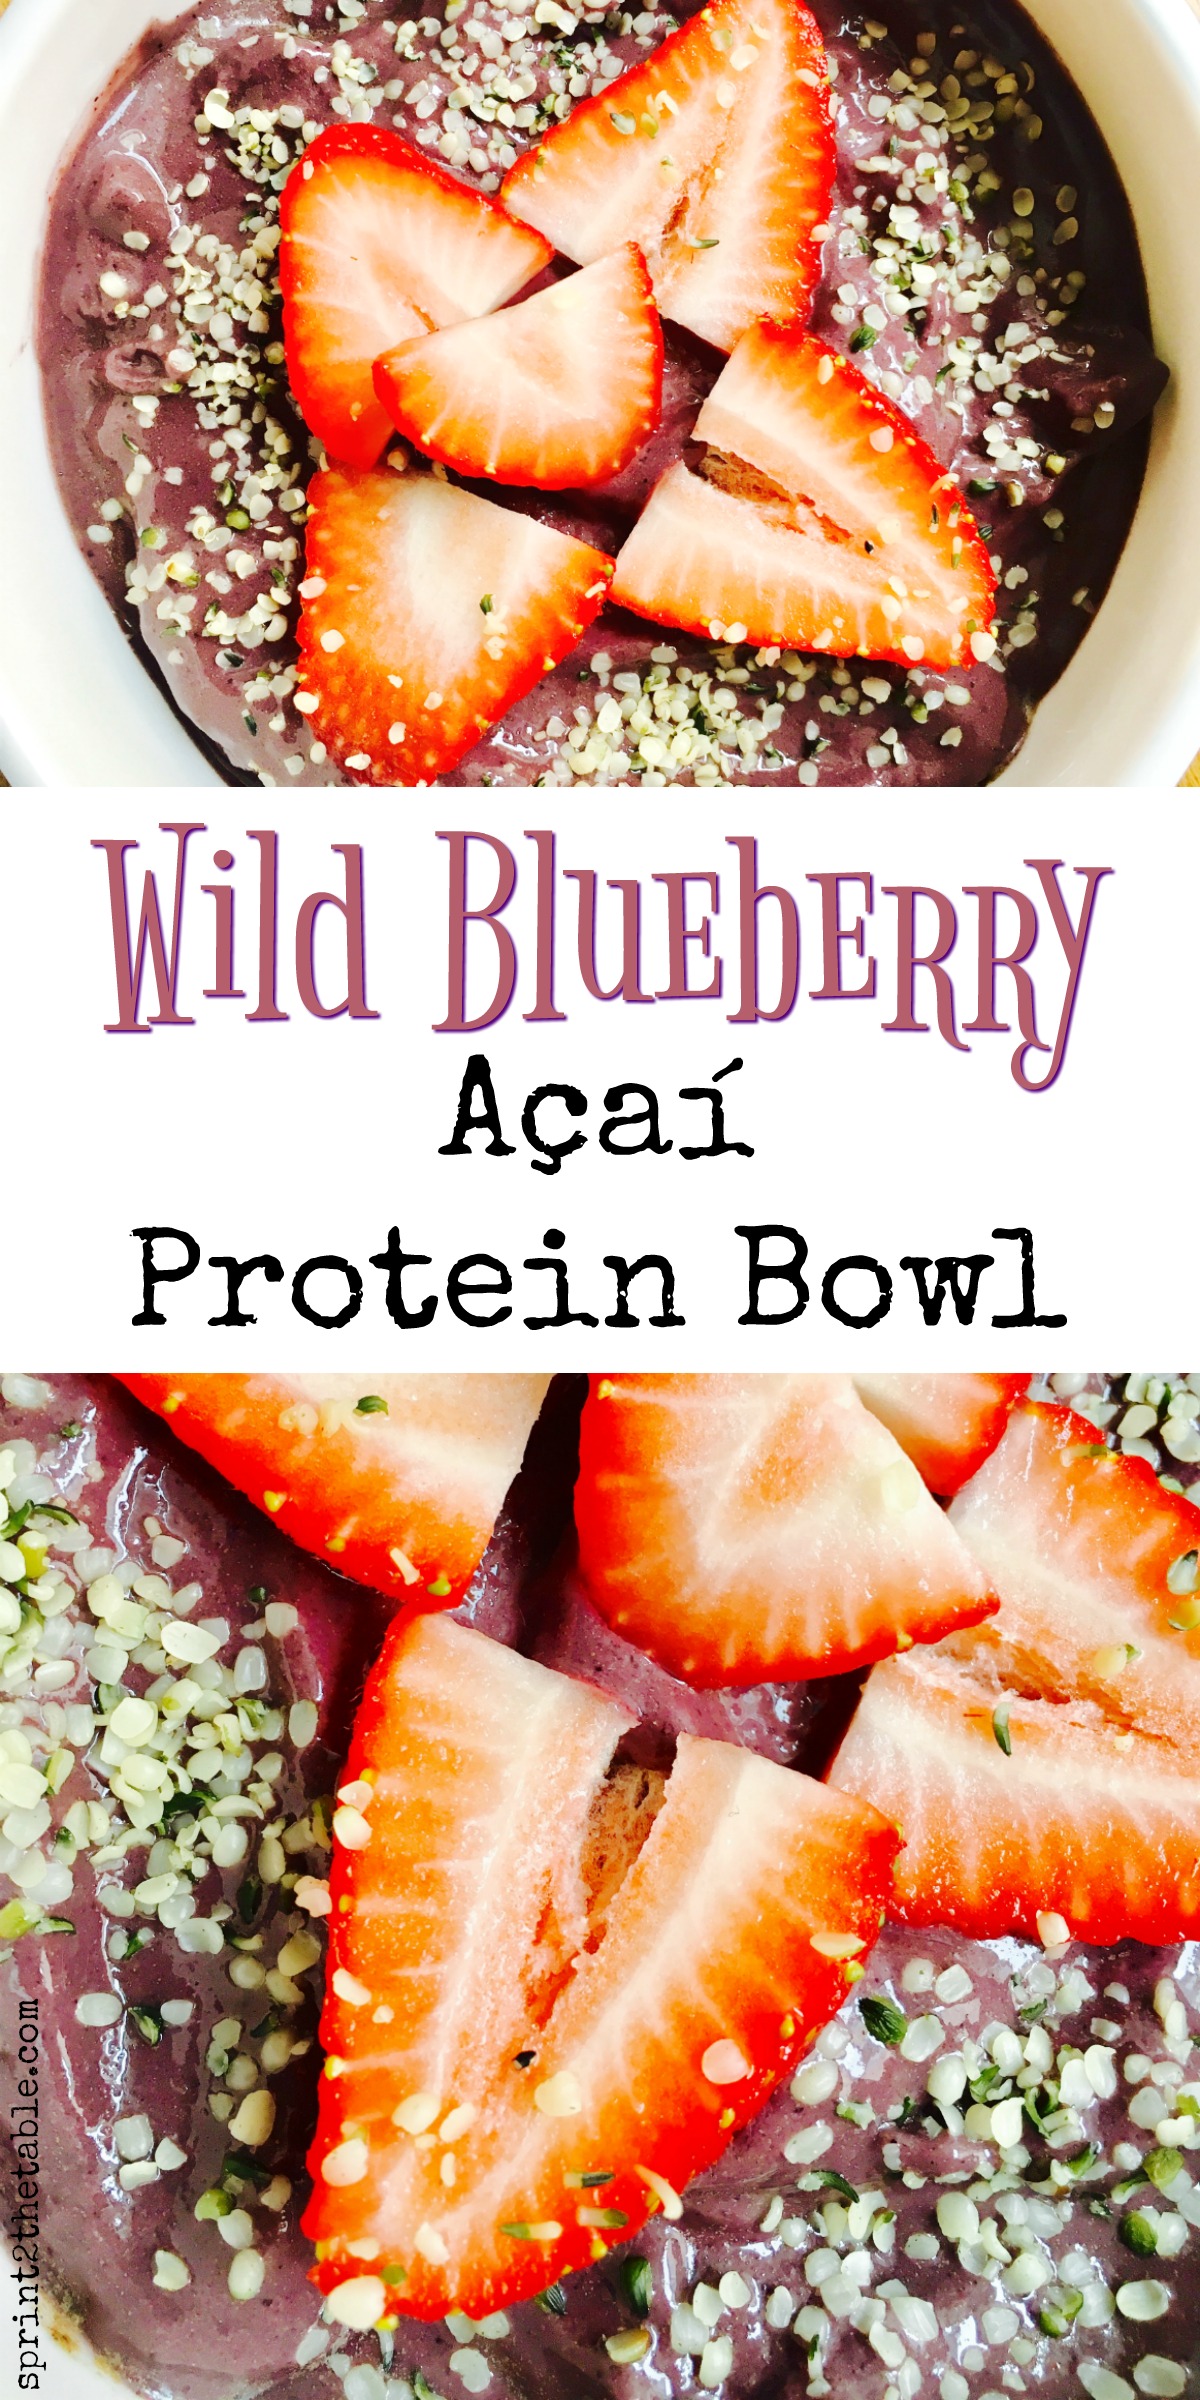 This homemade açaí bowl is packed with nutrients from wild blueberries, açaí, and protein. Enjoy one as a cool down post-workout, or as a healthy afternoon snack!